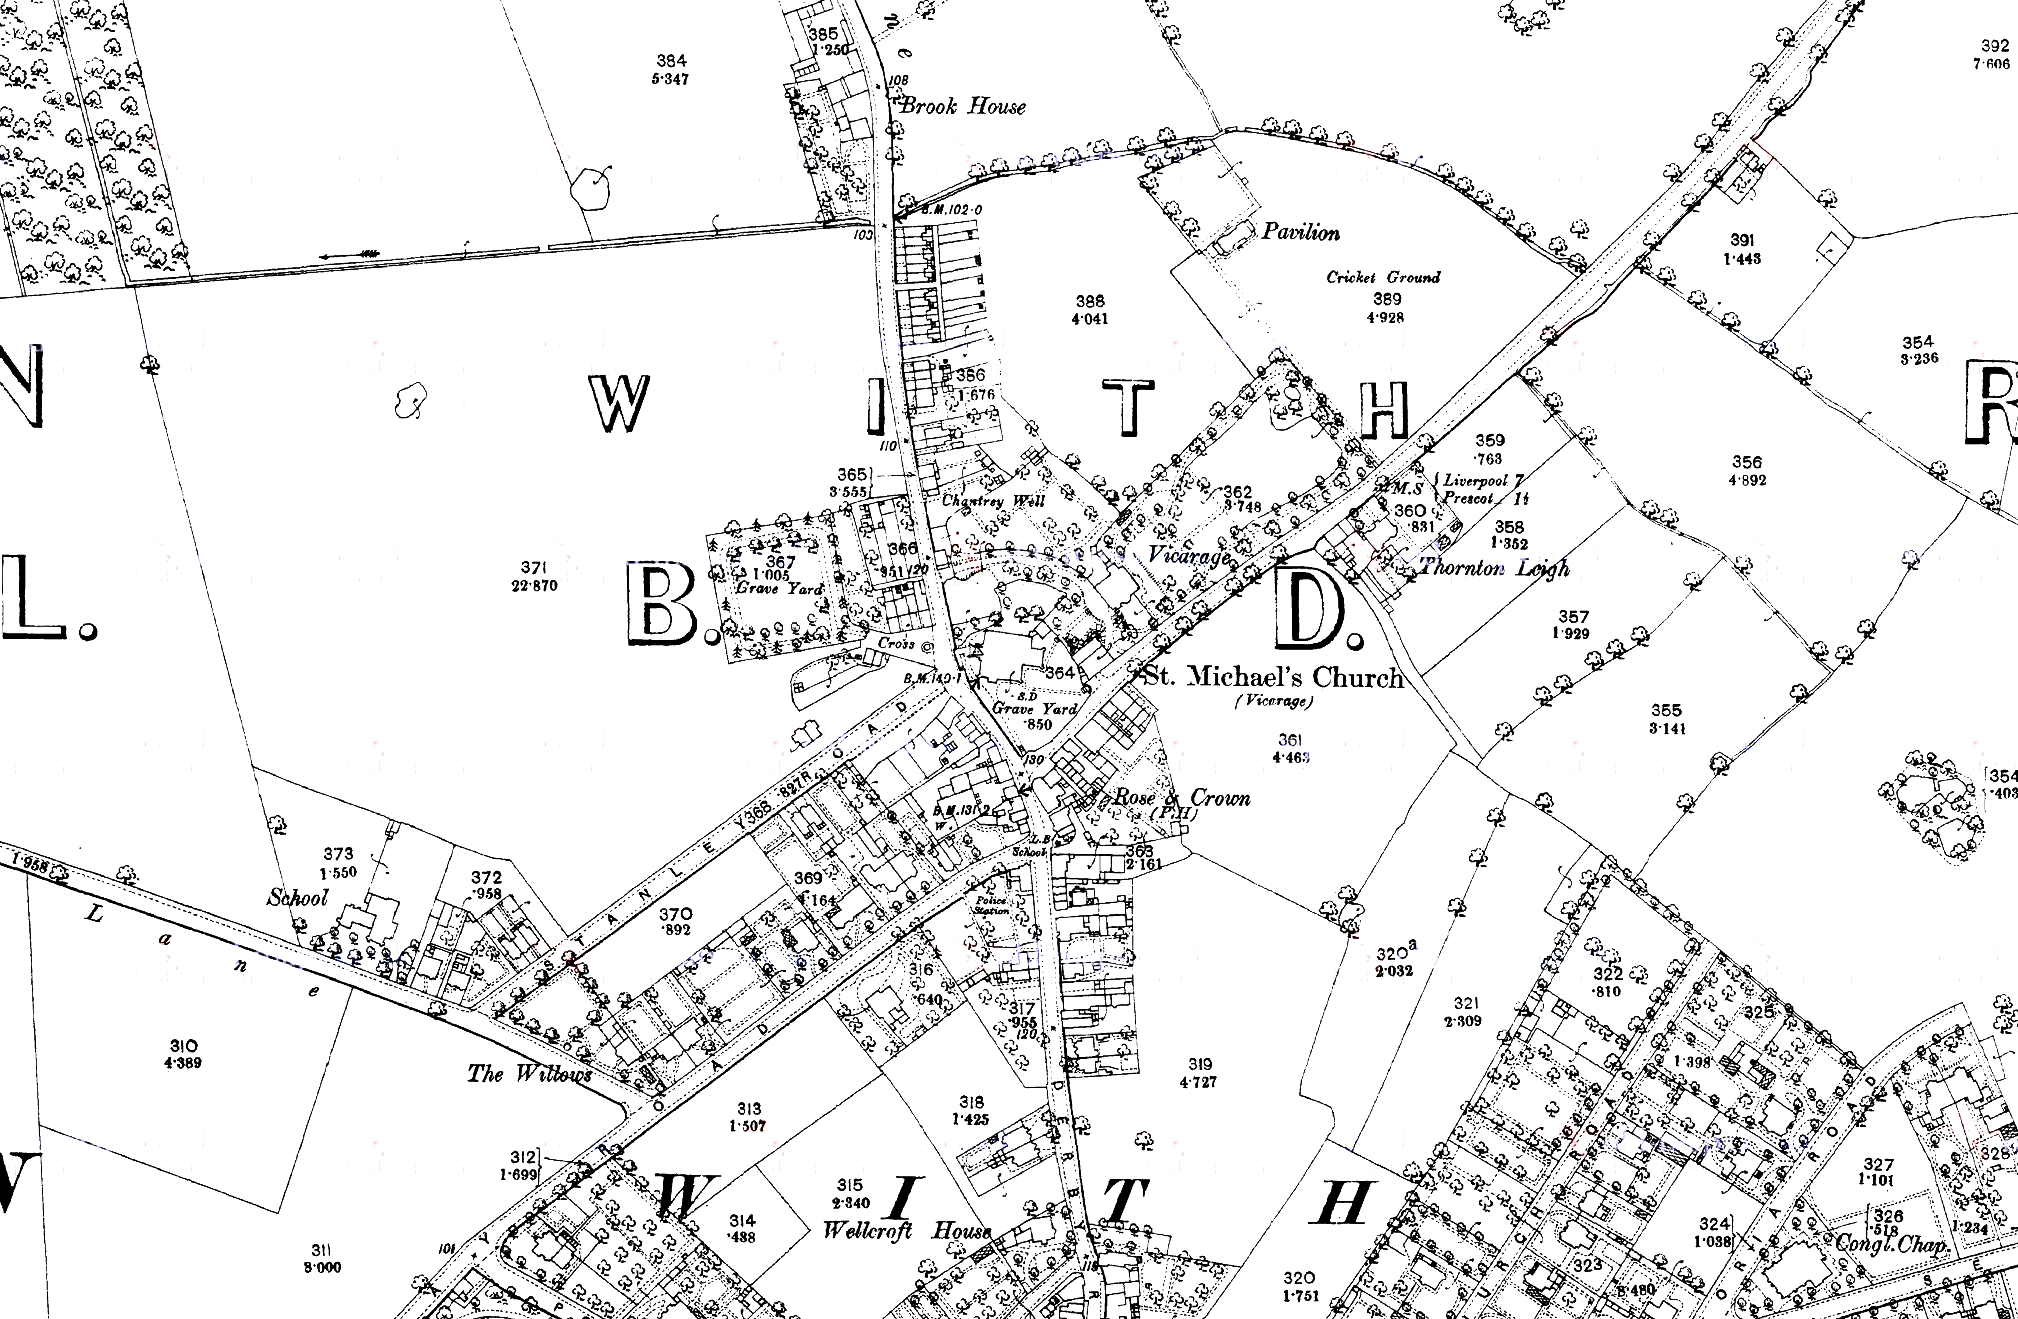 1850 map showing the area covered by the Huyton townfield